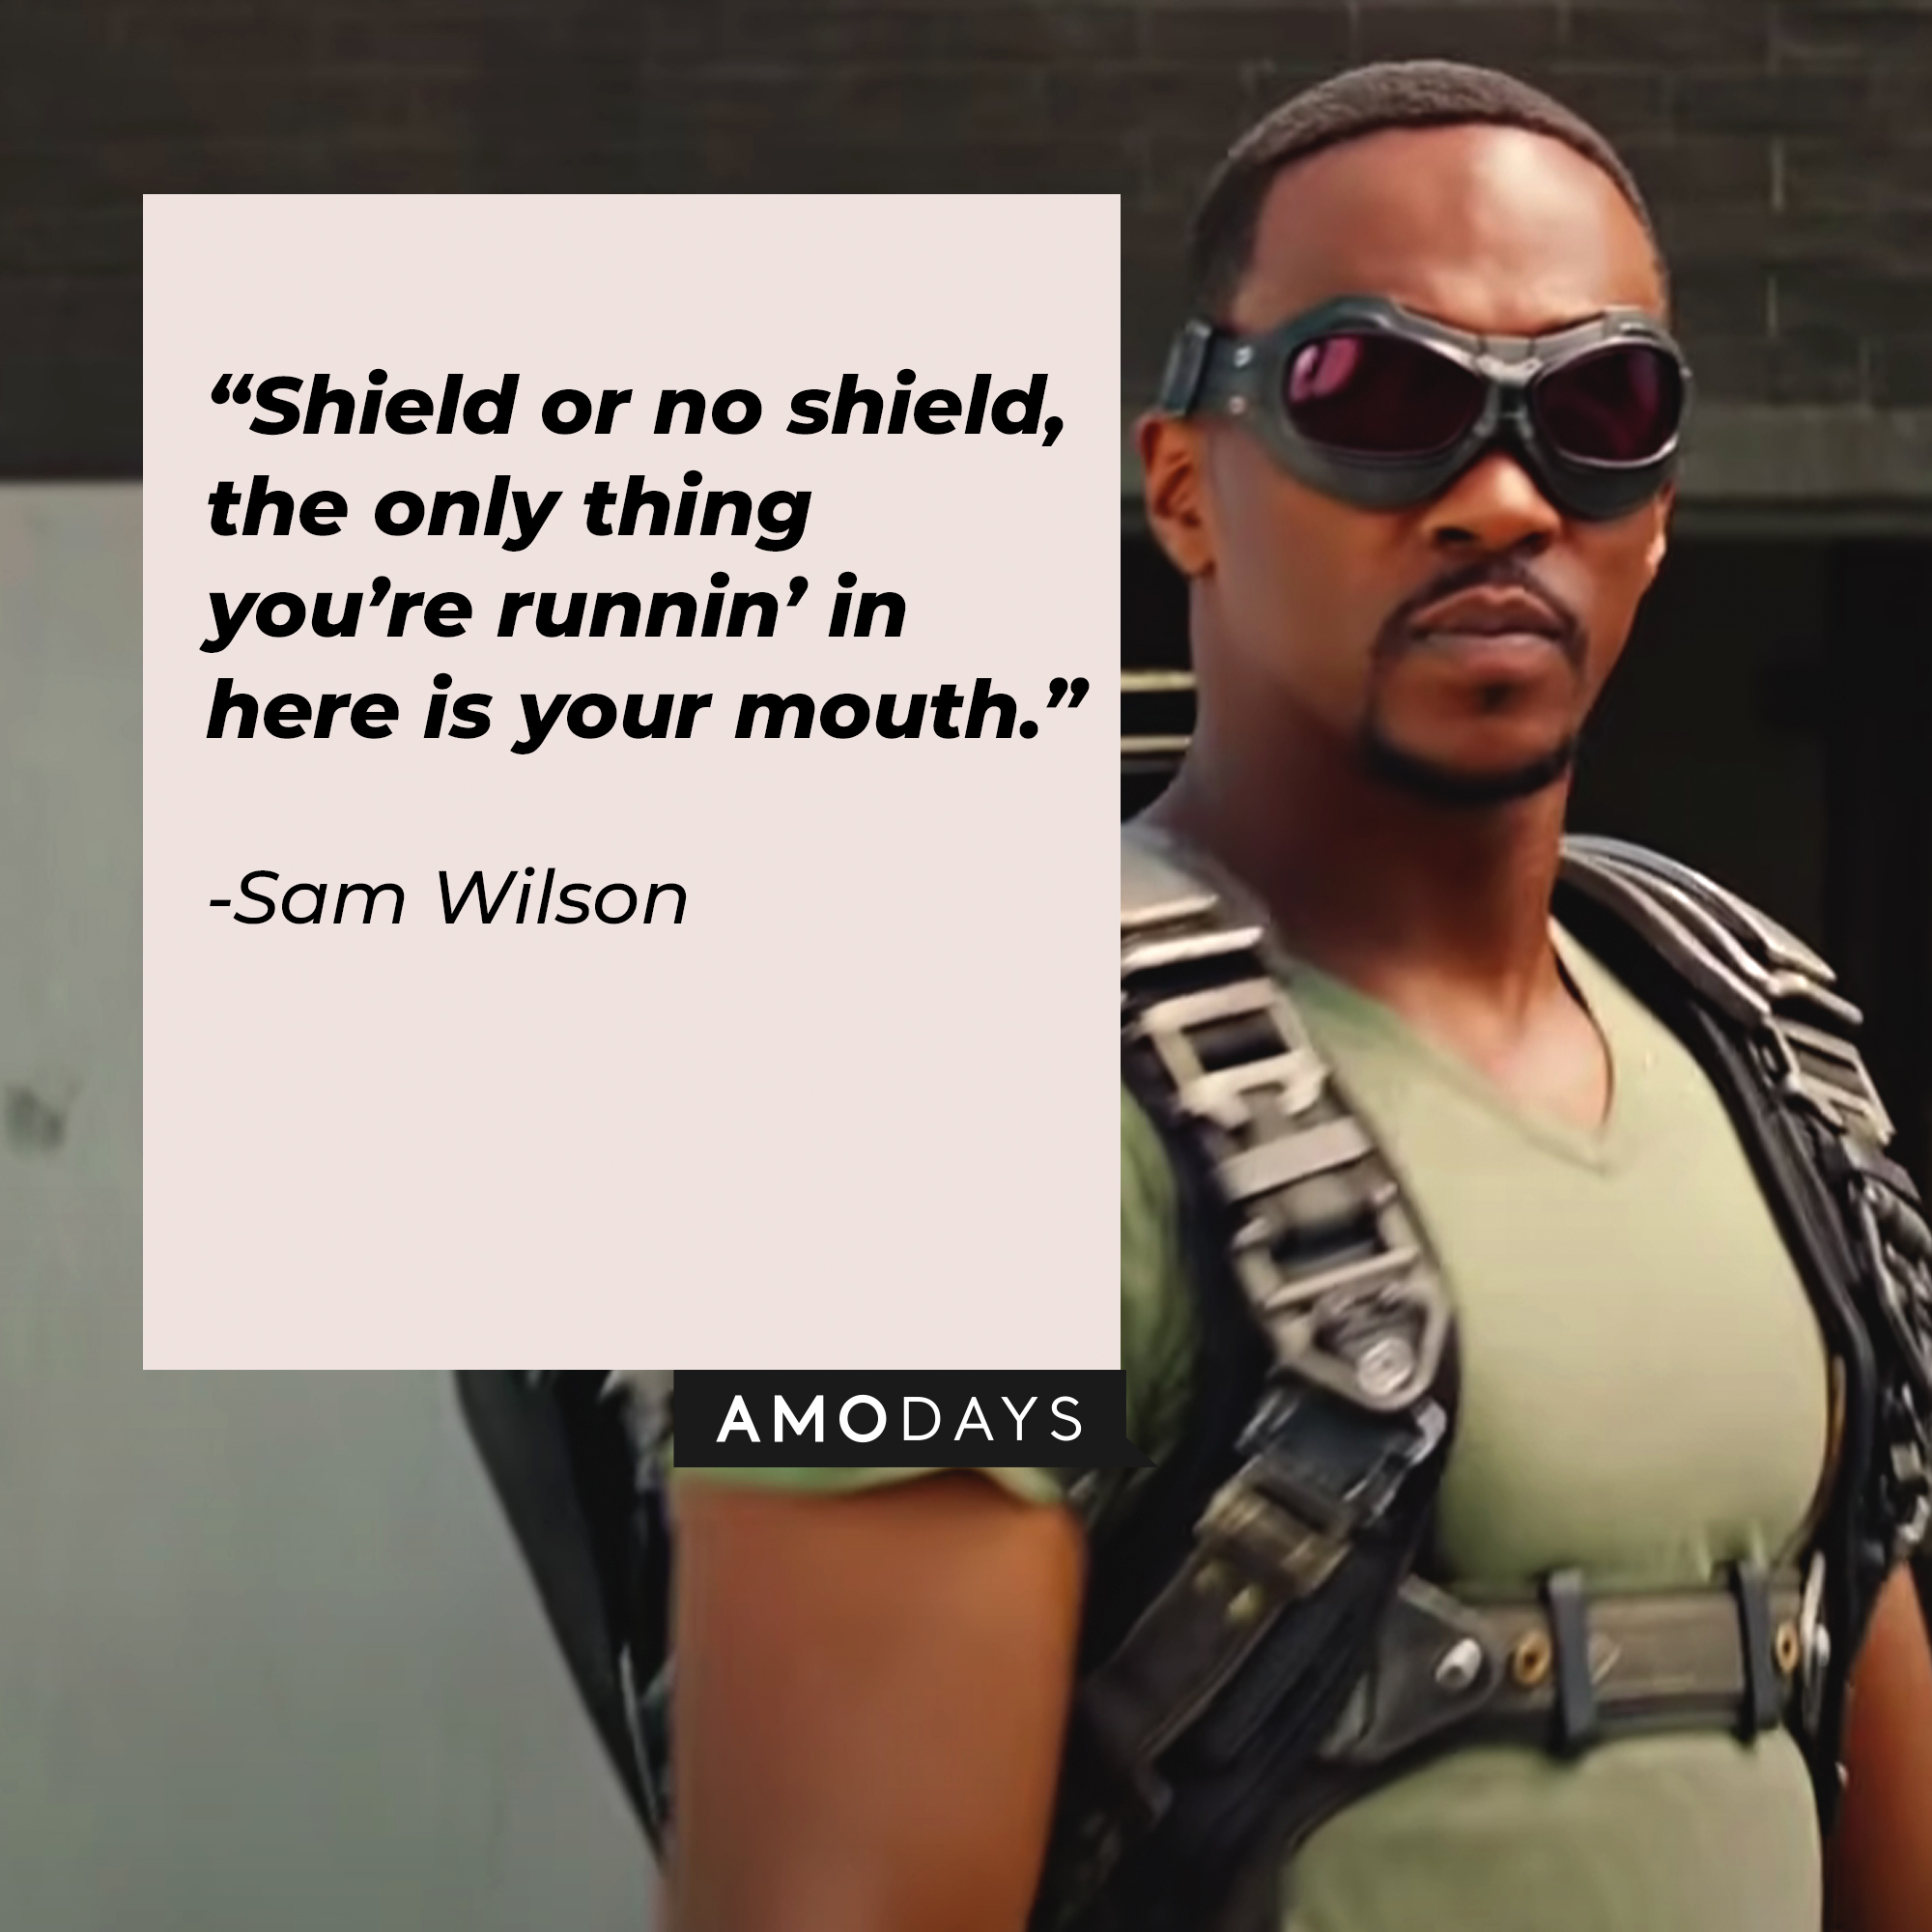 Sam Wilson, with his quote: “Shield or no shield, the only thing you’re runnin’ in here is your mouth.” | Source: Youtube.com/marvel